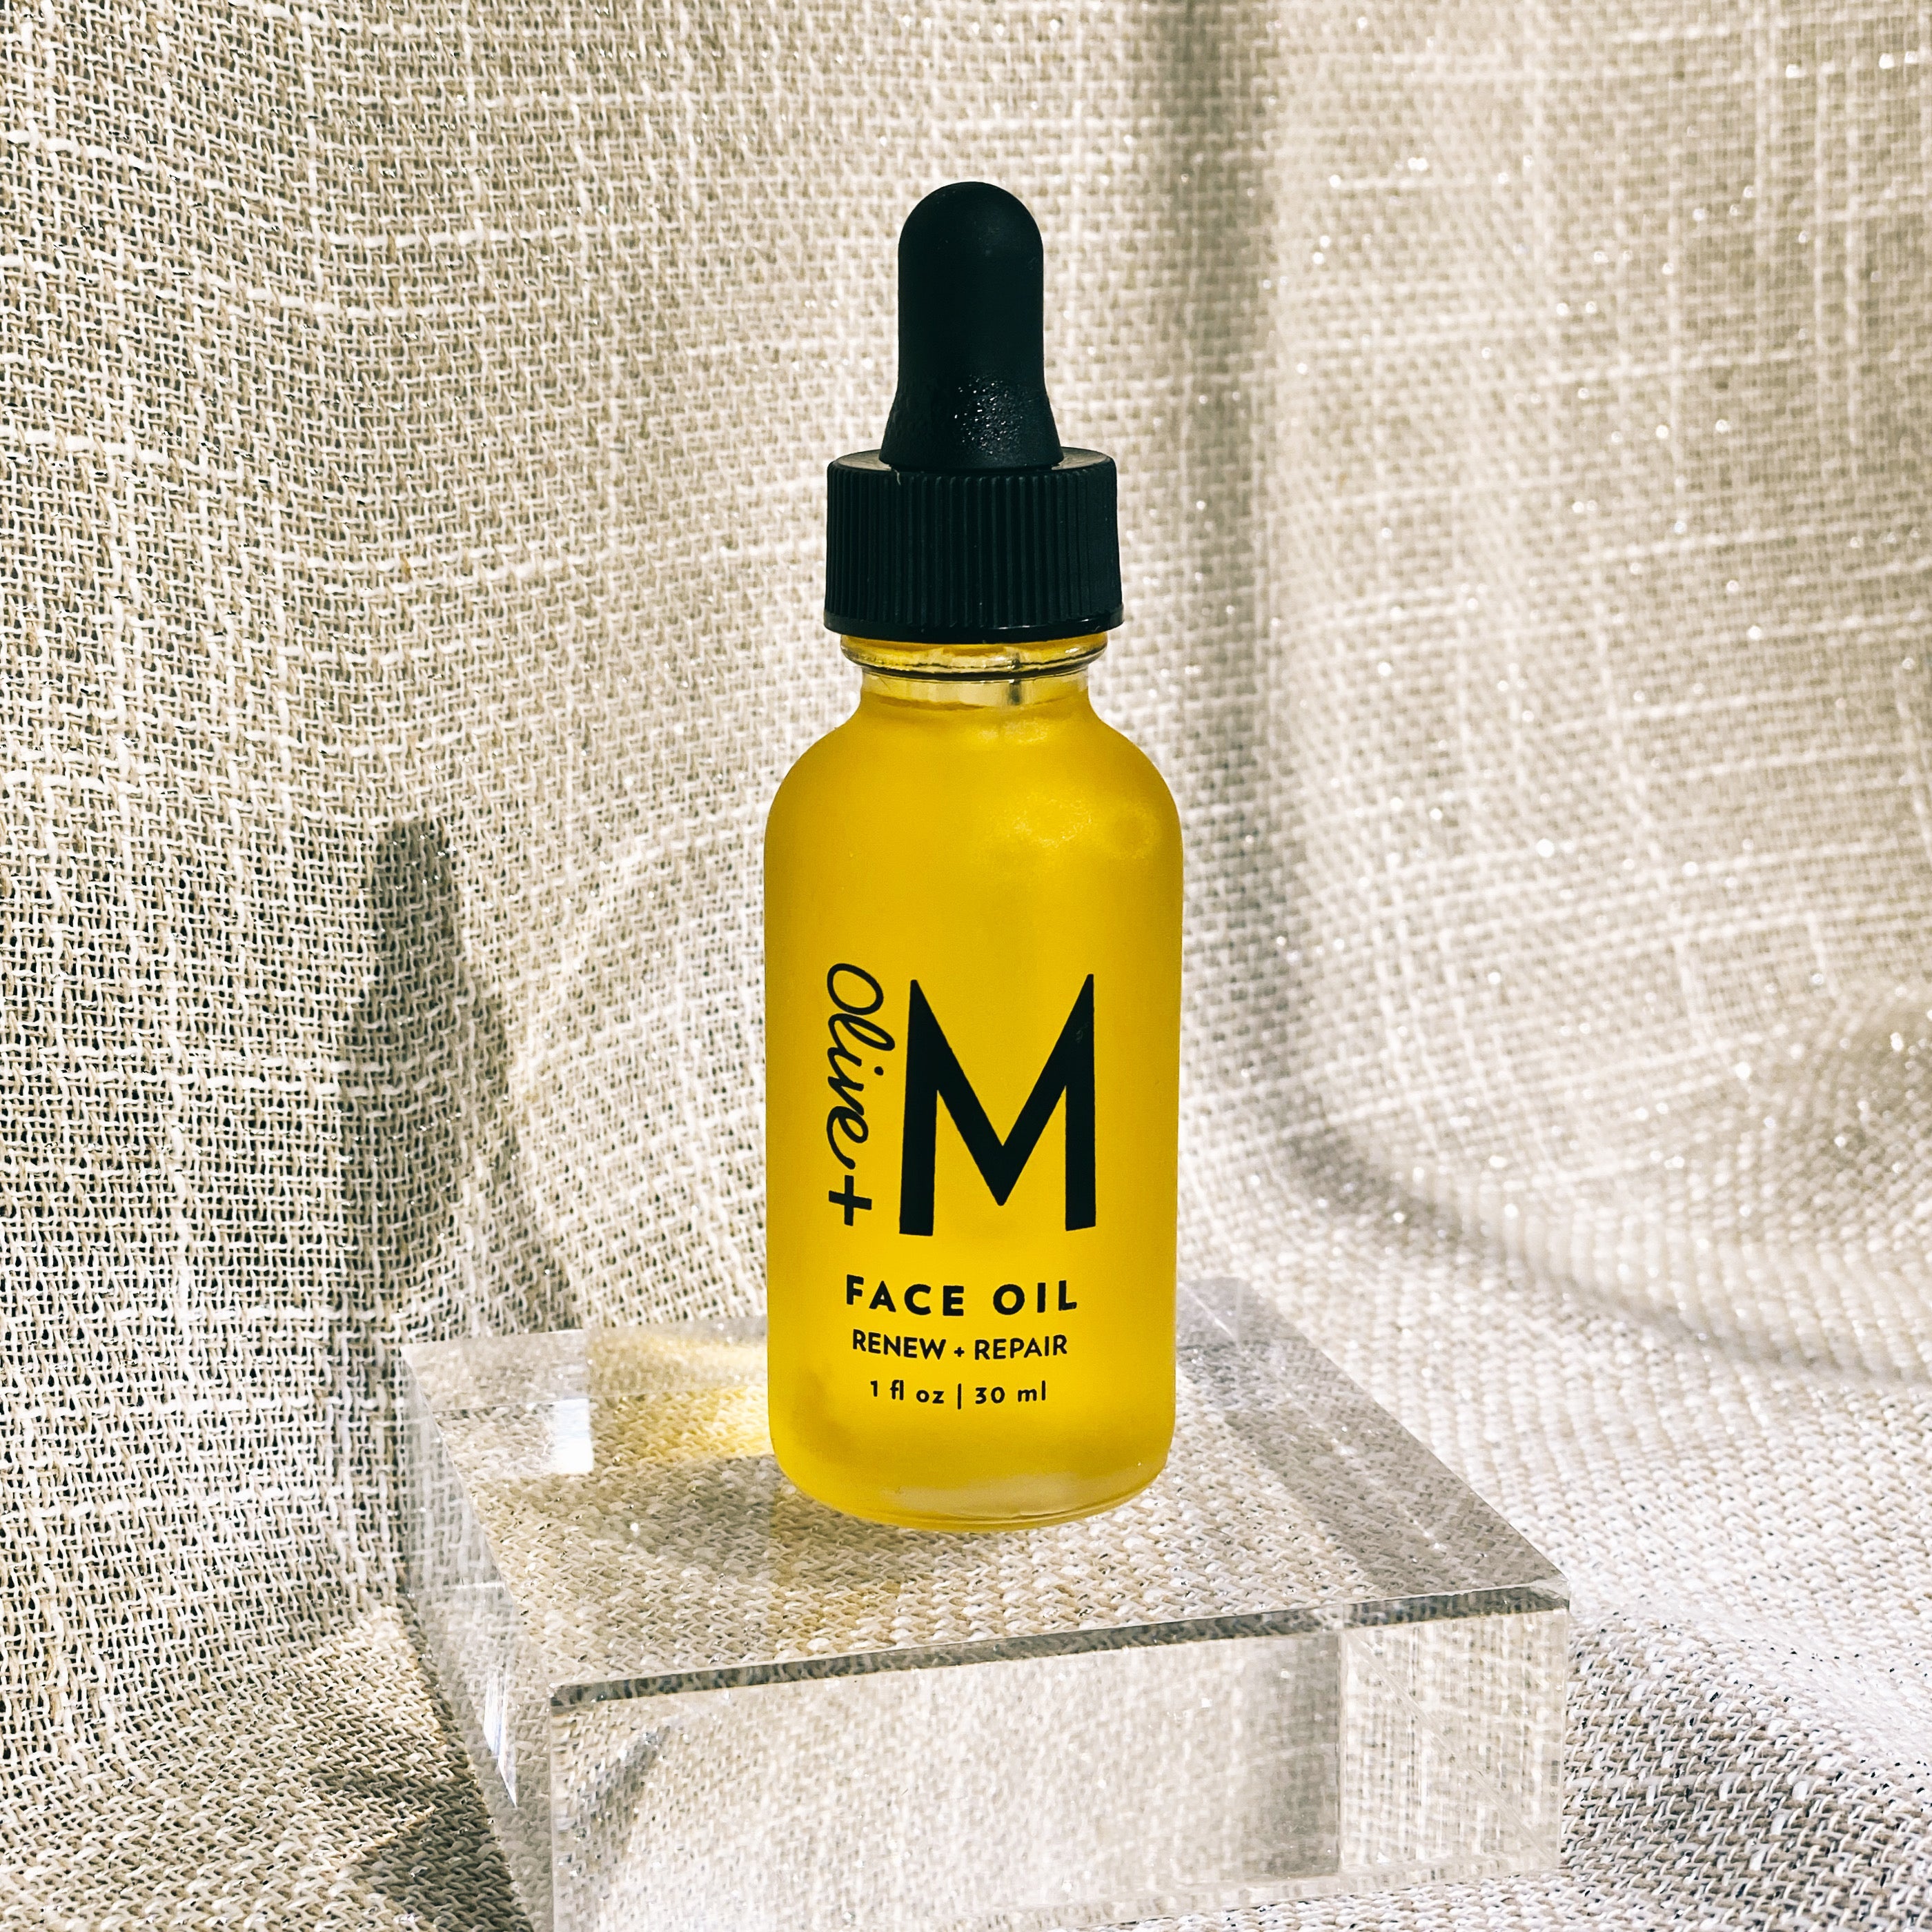  Renew + Repair Face Oil 2oz by Olive + M Olive + M Perfumarie